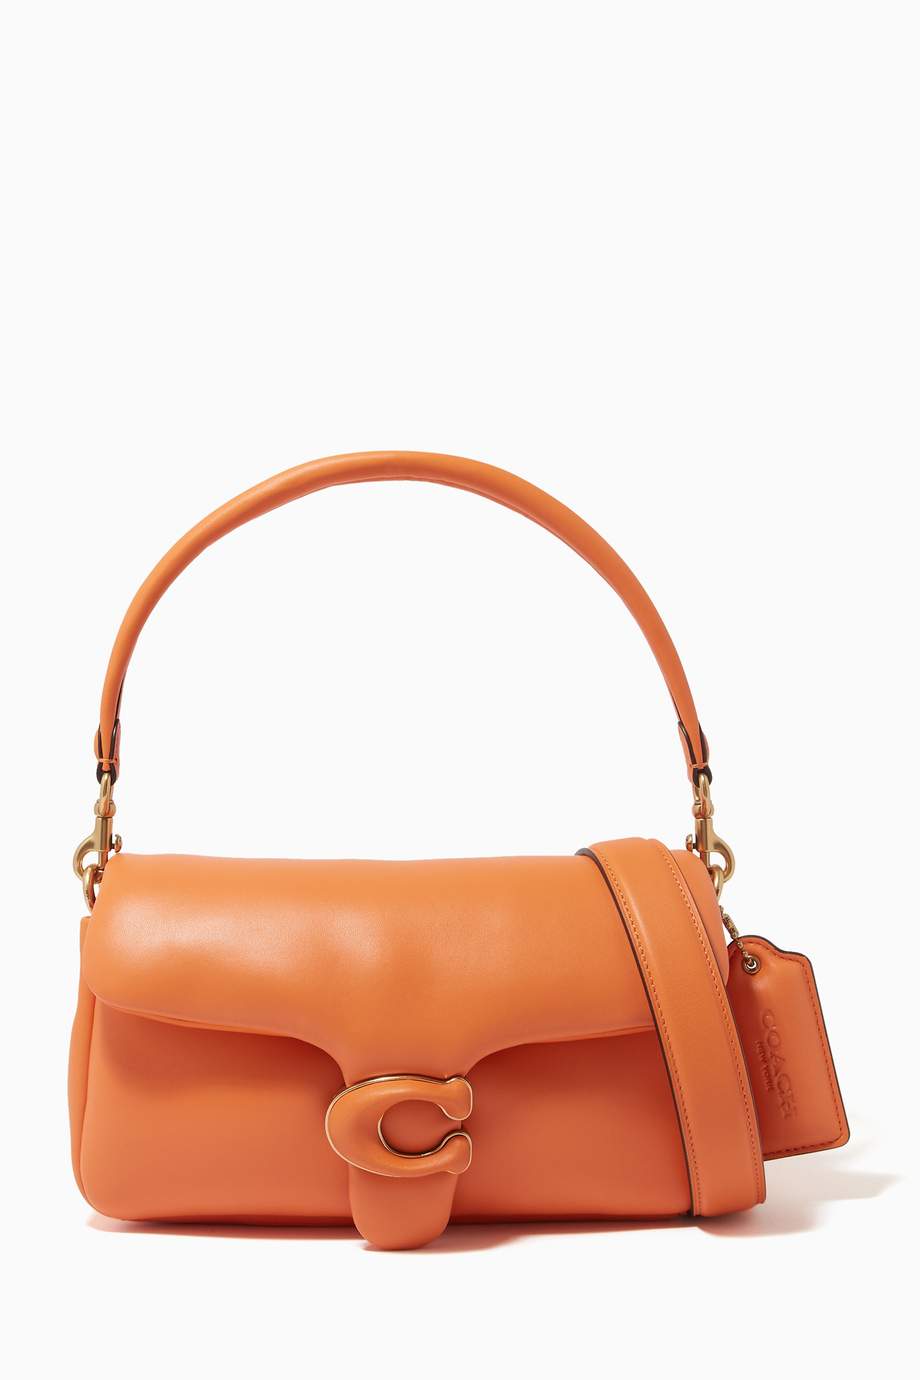 Shop Coach Orange Pillow Tabby Shoulder Bag 26 in Nappa Leather for ...